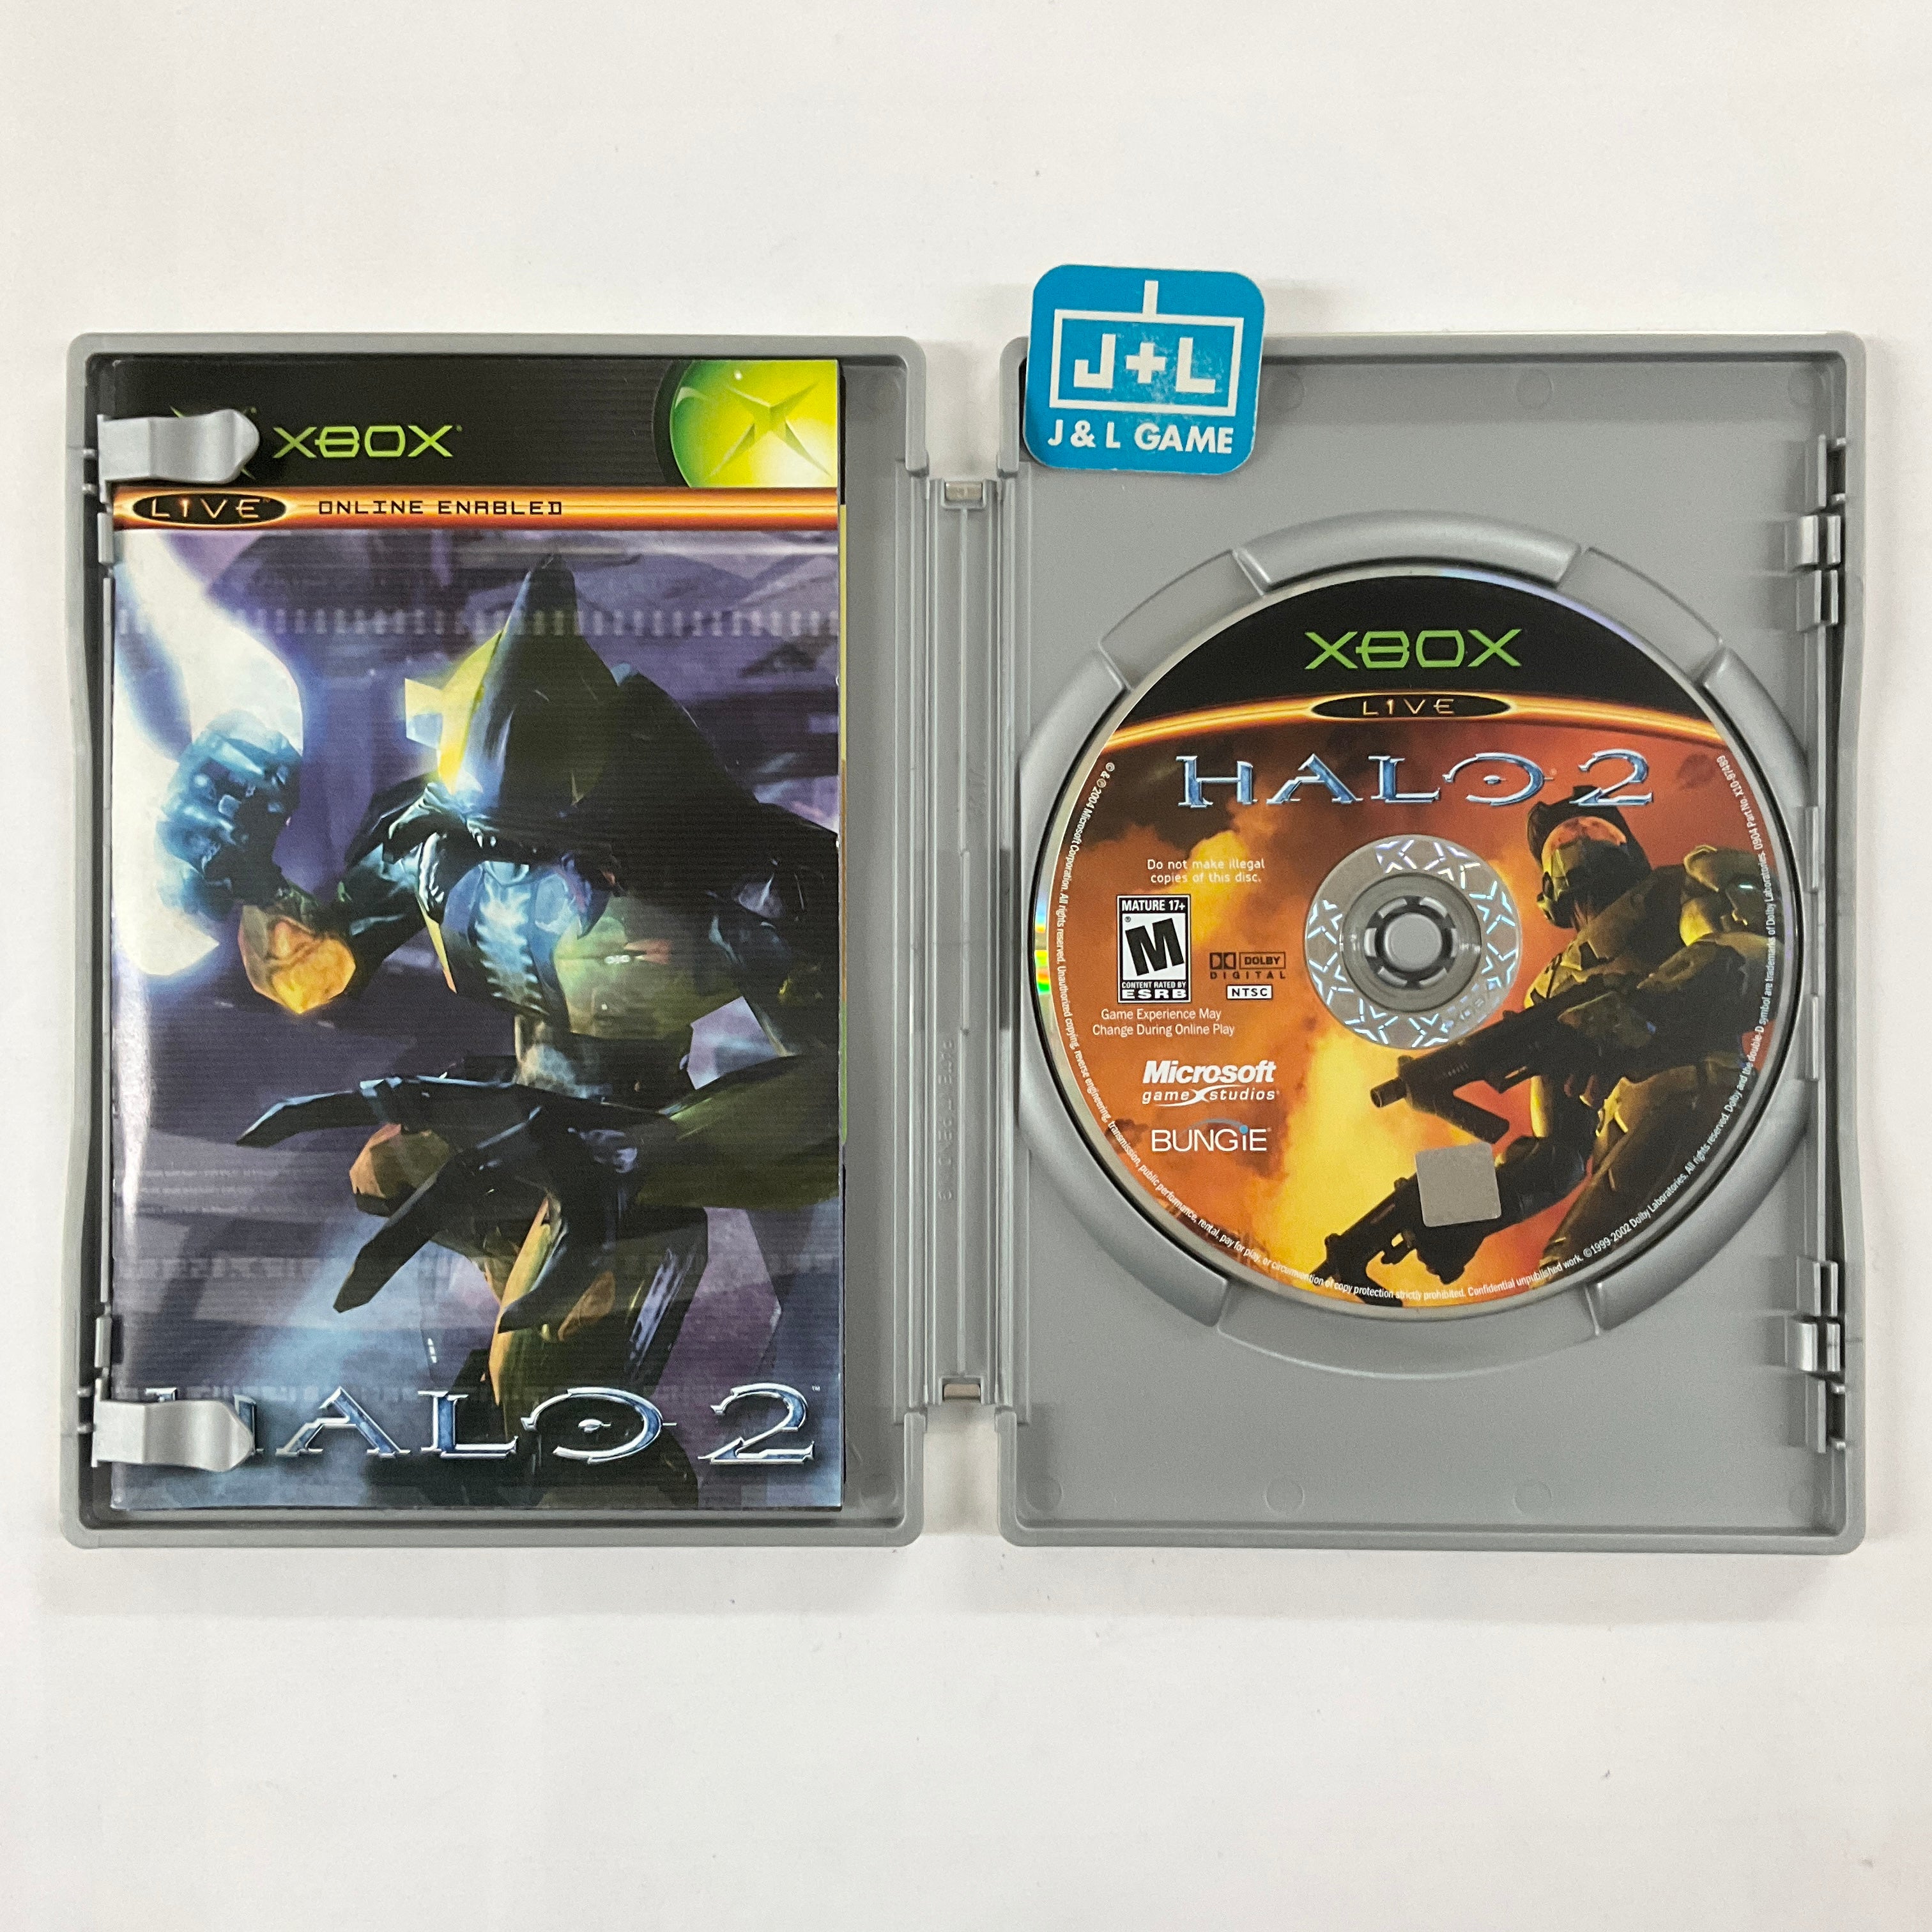 Halo 2 (Limited Edition) - (XB) Xbox [Pre-Owned] Video Games Microsoft Game Studios   